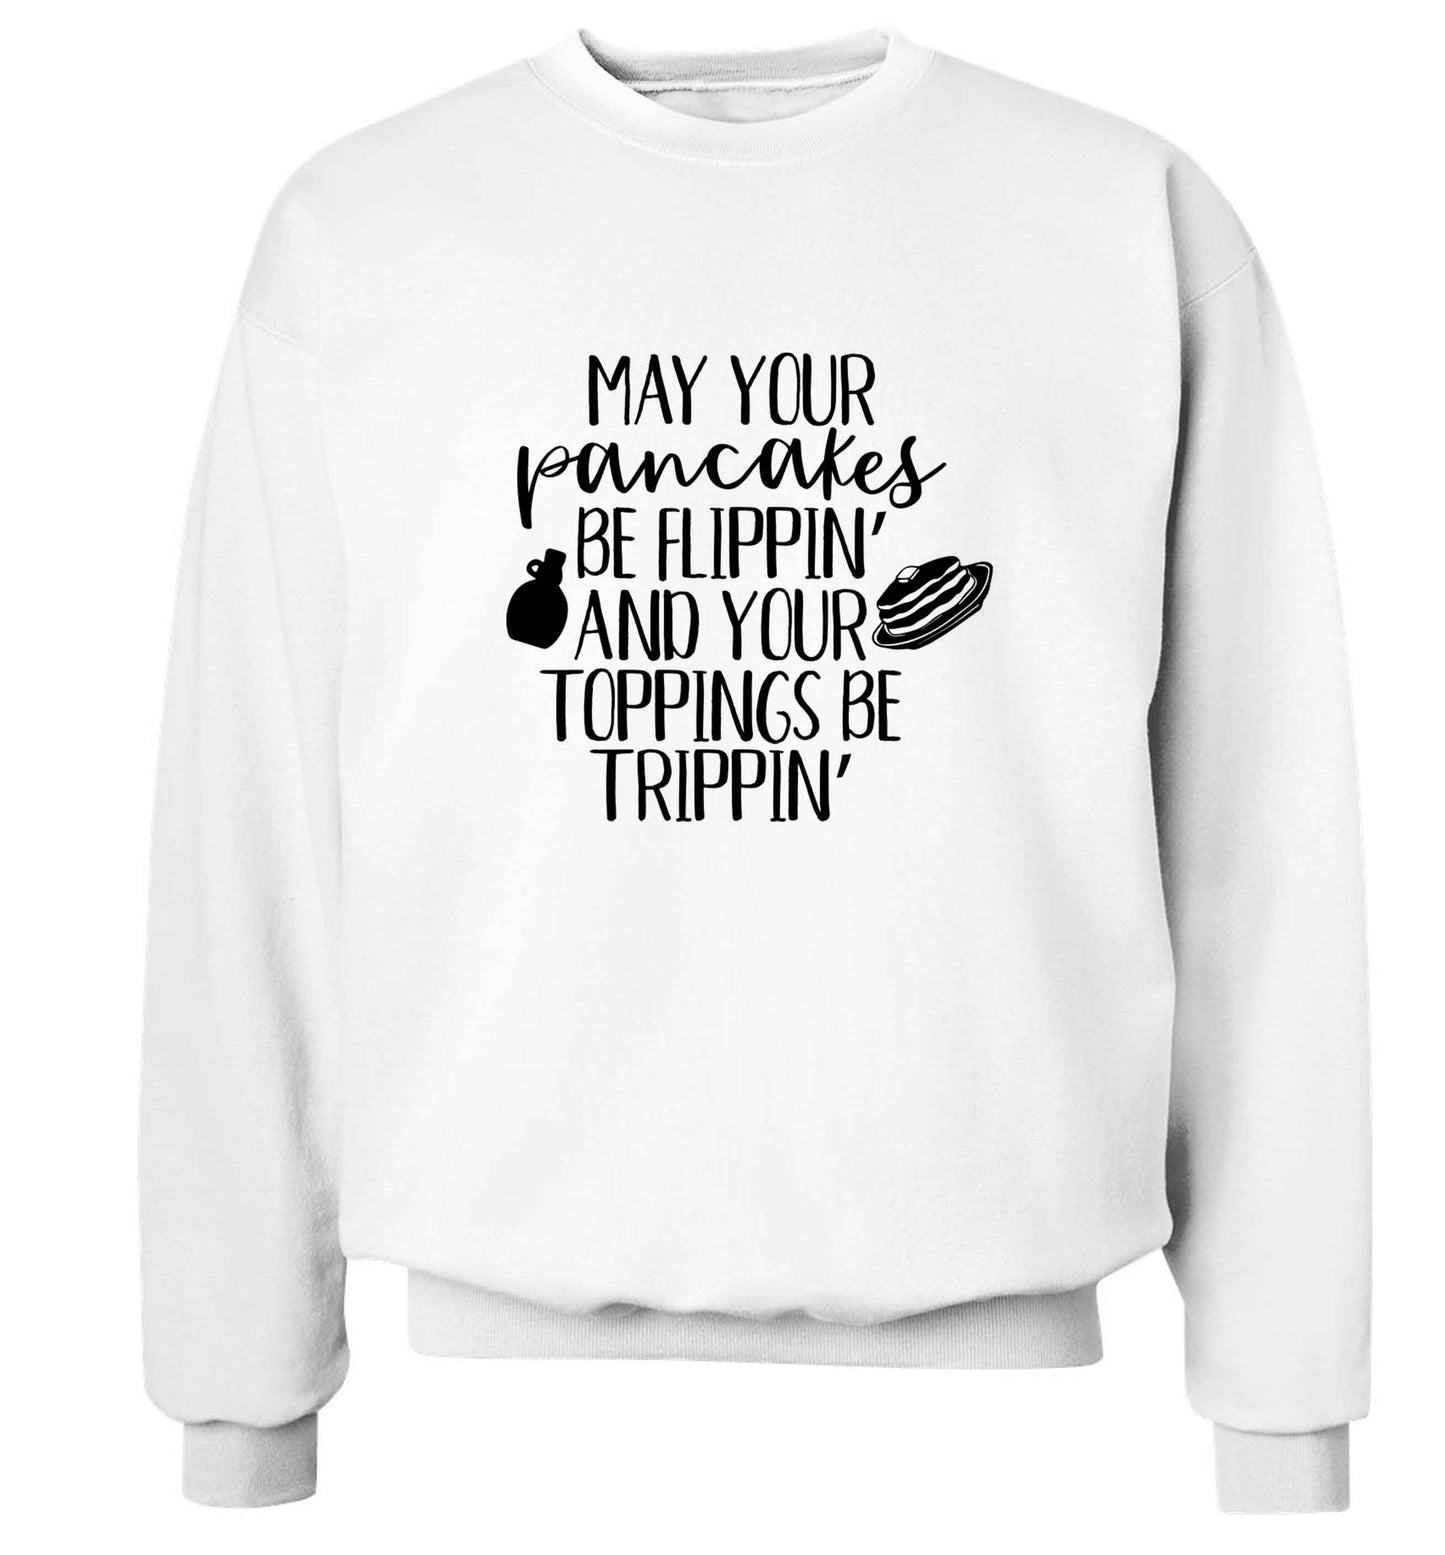 May your pancakes be flippin' and your toppings be trippin' adult's unisex white sweater 2XL